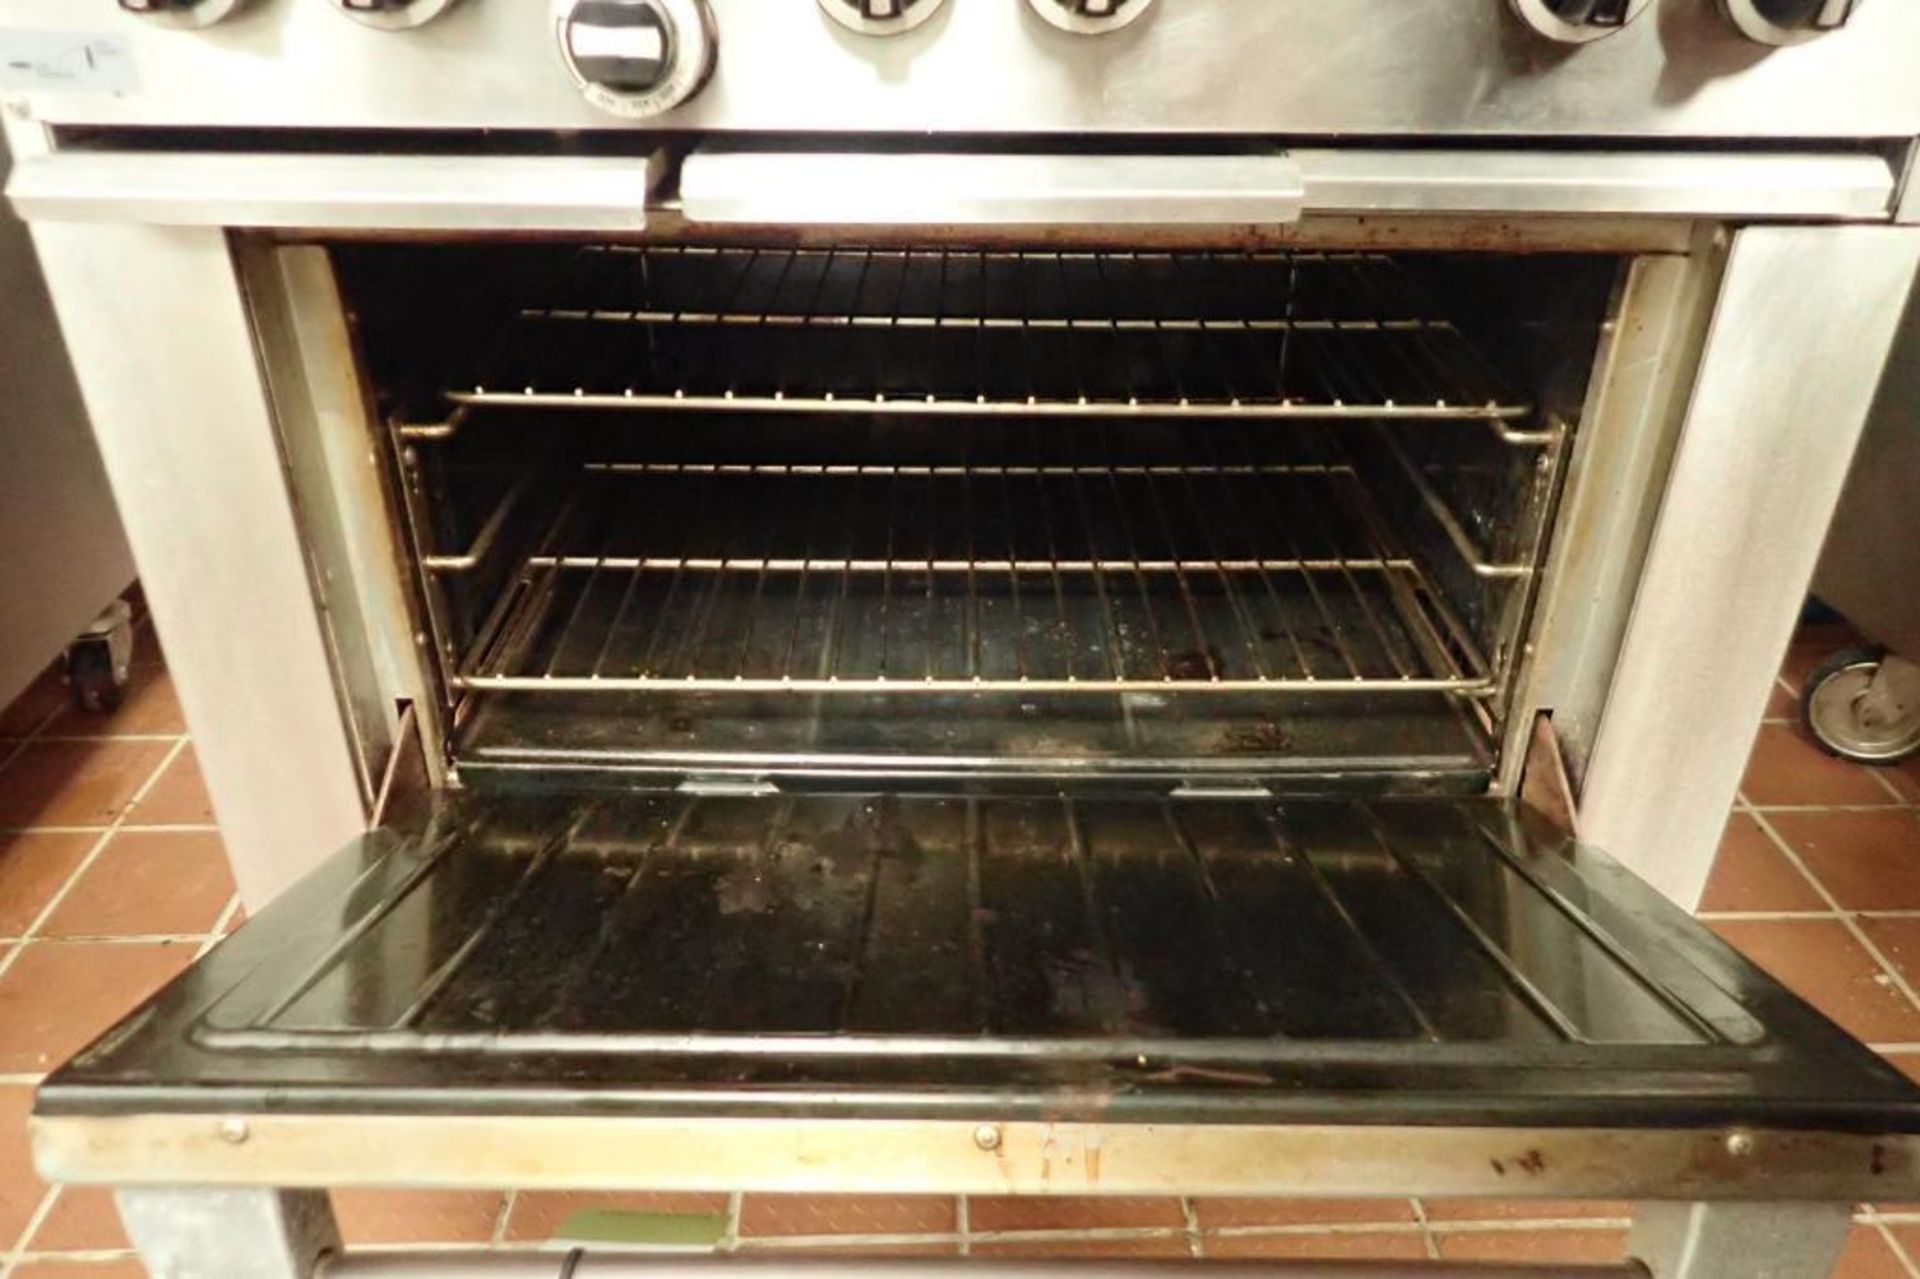 Garland six burner standard oven, Model G36-6R, natural gas, 36 in. wide x 35 in. deep x 57 in. tall - Image 4 of 6